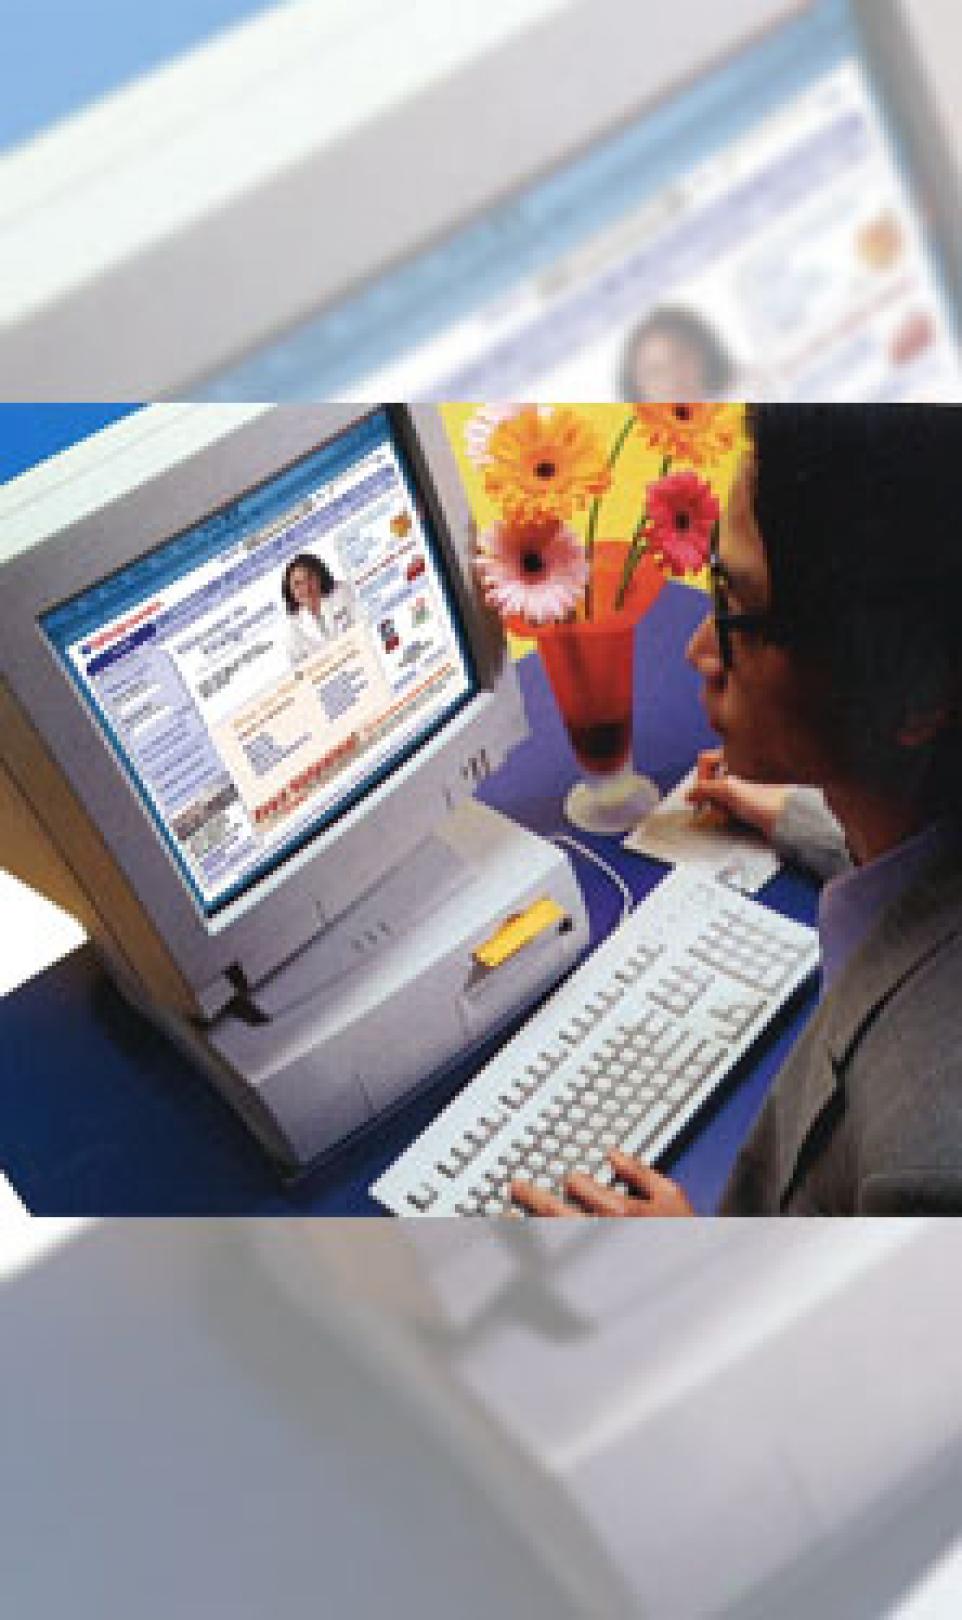 A woman using a 90's computer to access the Walgreens.com online pharmacy